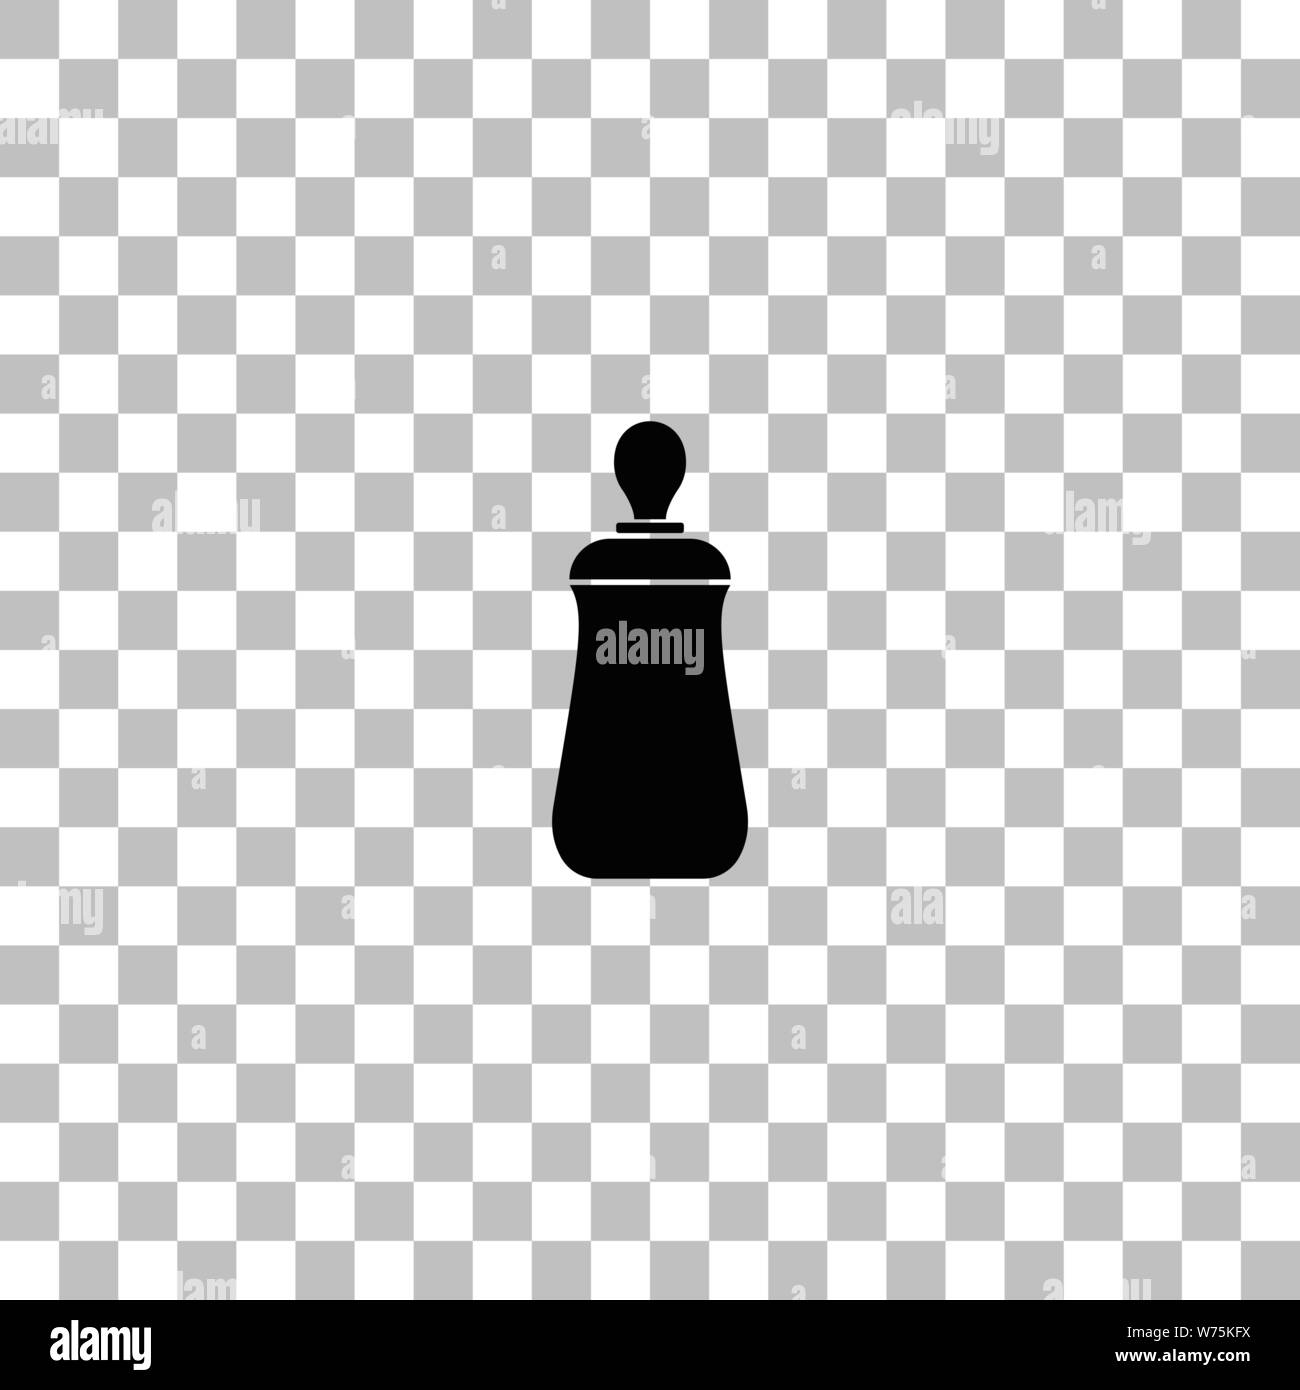 Baby bottle. Black flat icon on a transparent background. Pictogram for your project Stock Vector